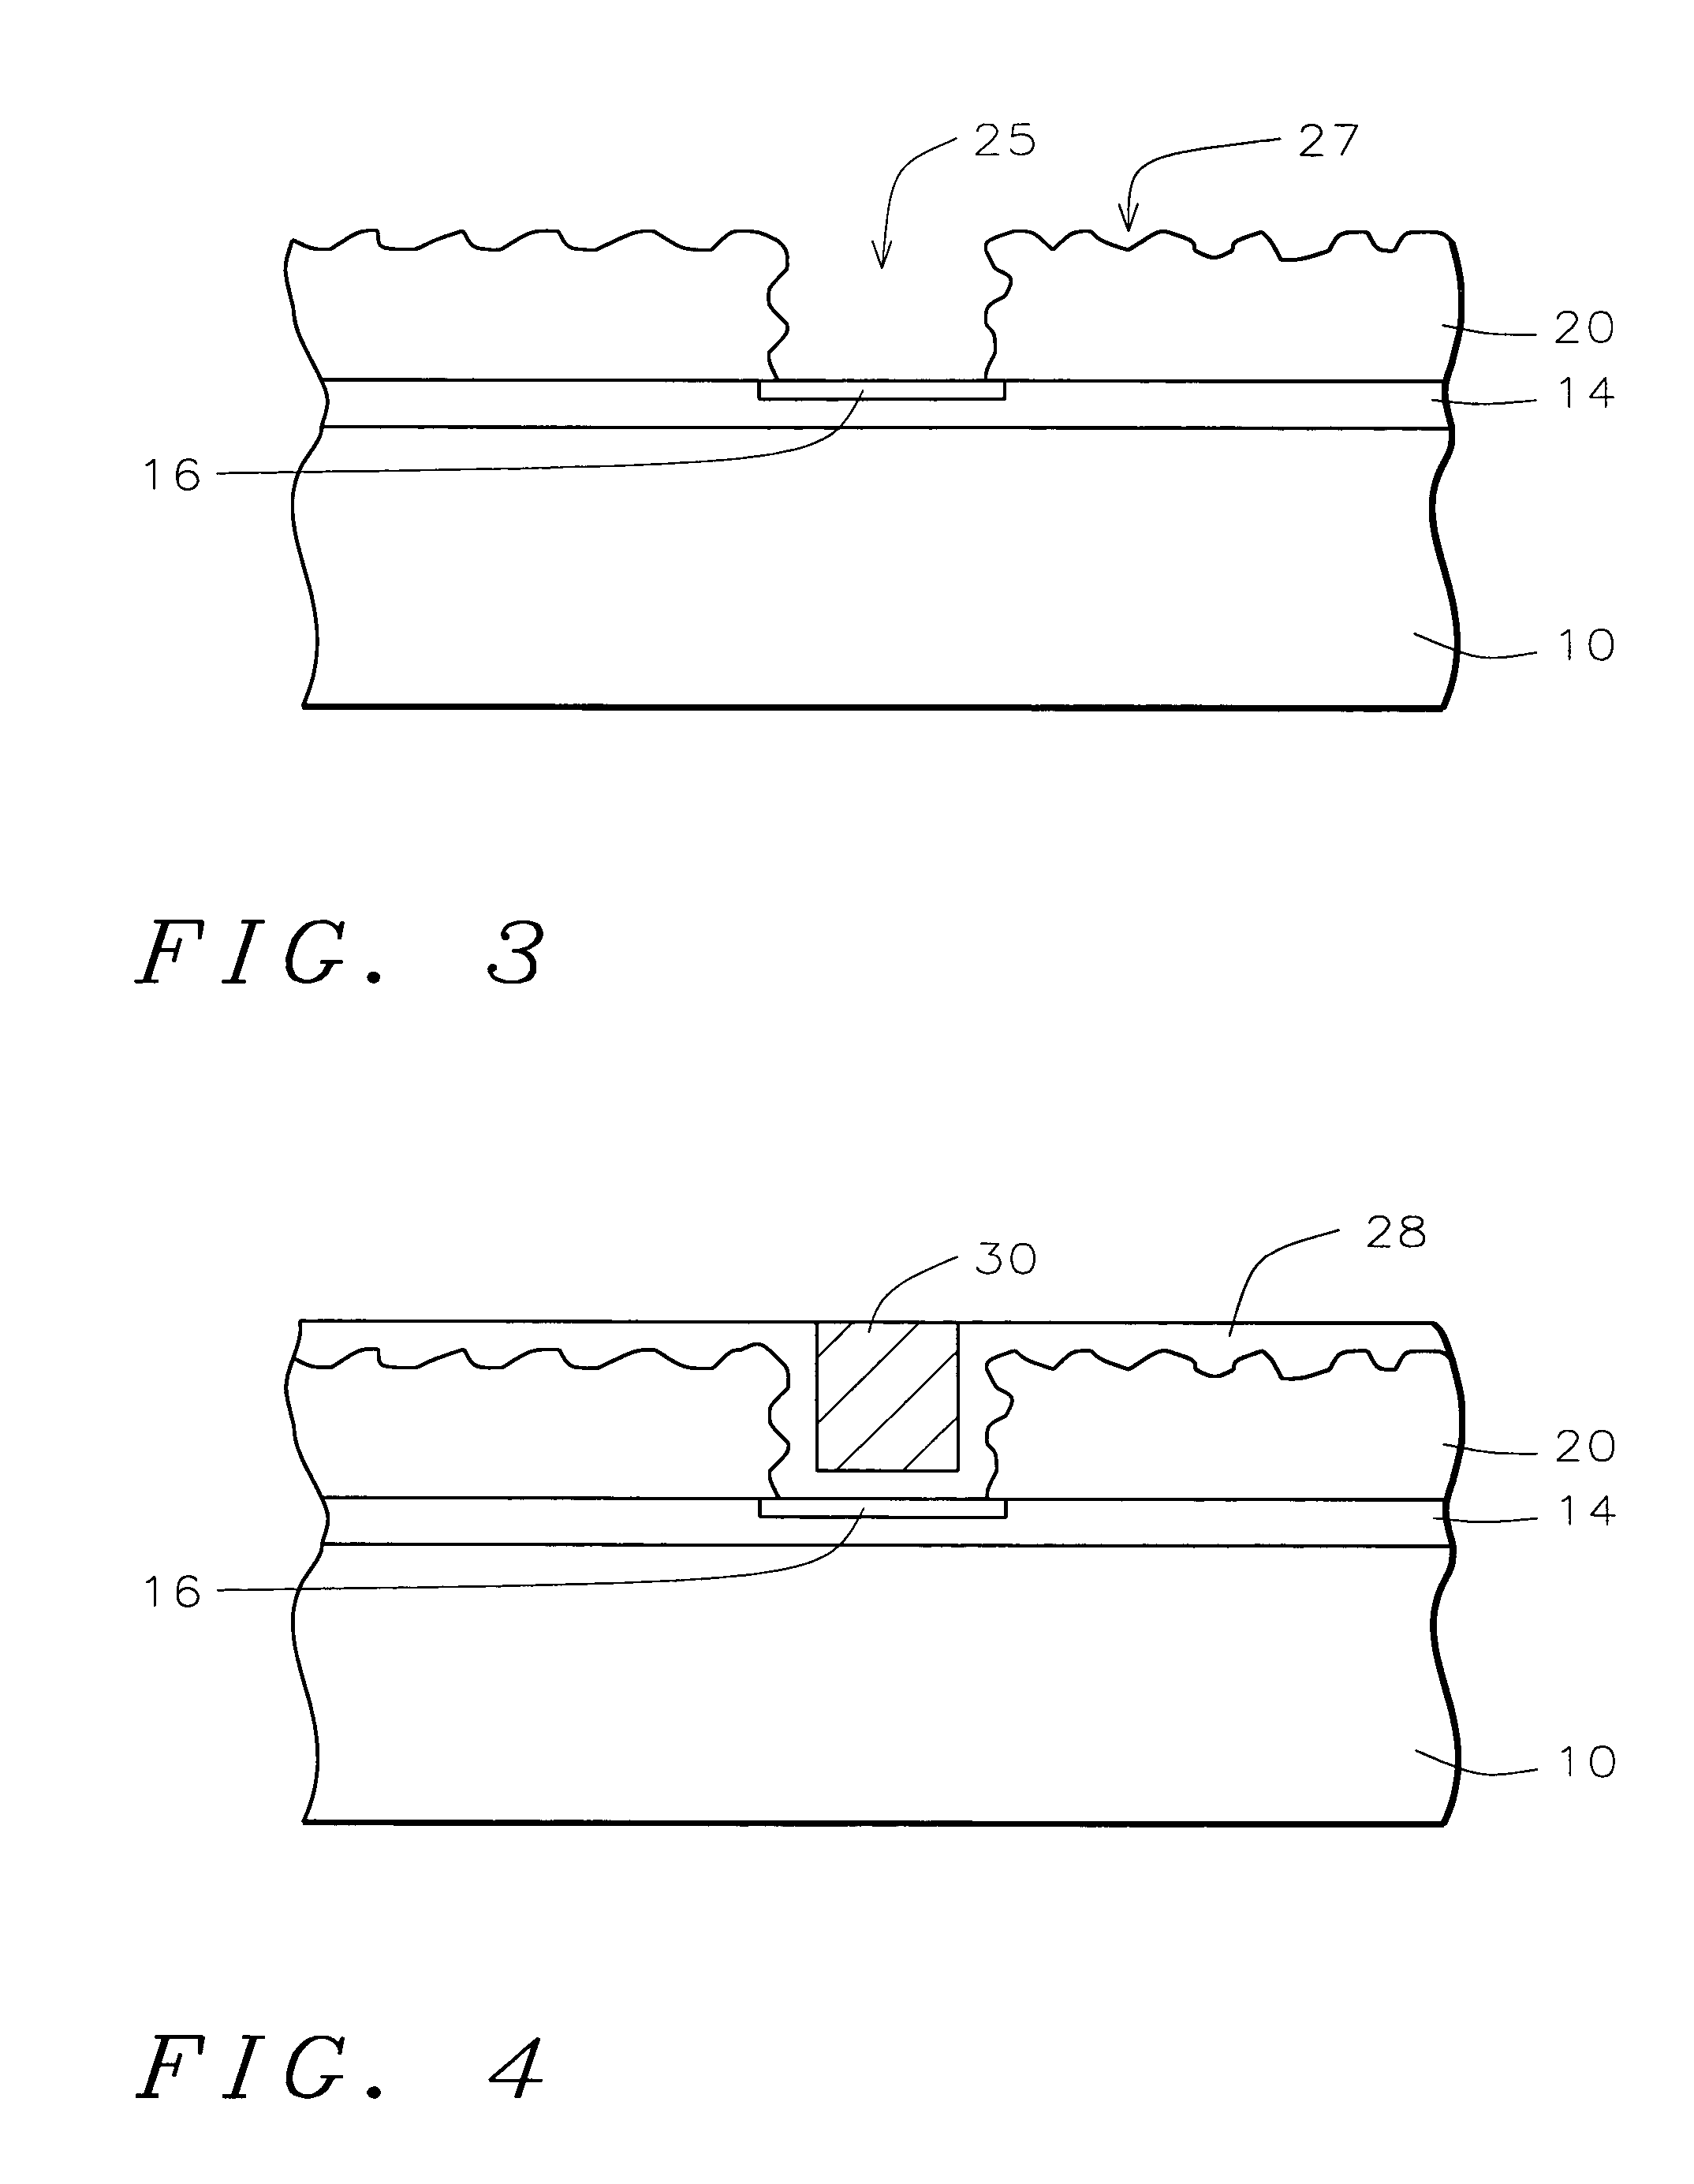 Device structure having enhanced surface adhesion and failure mode analysis